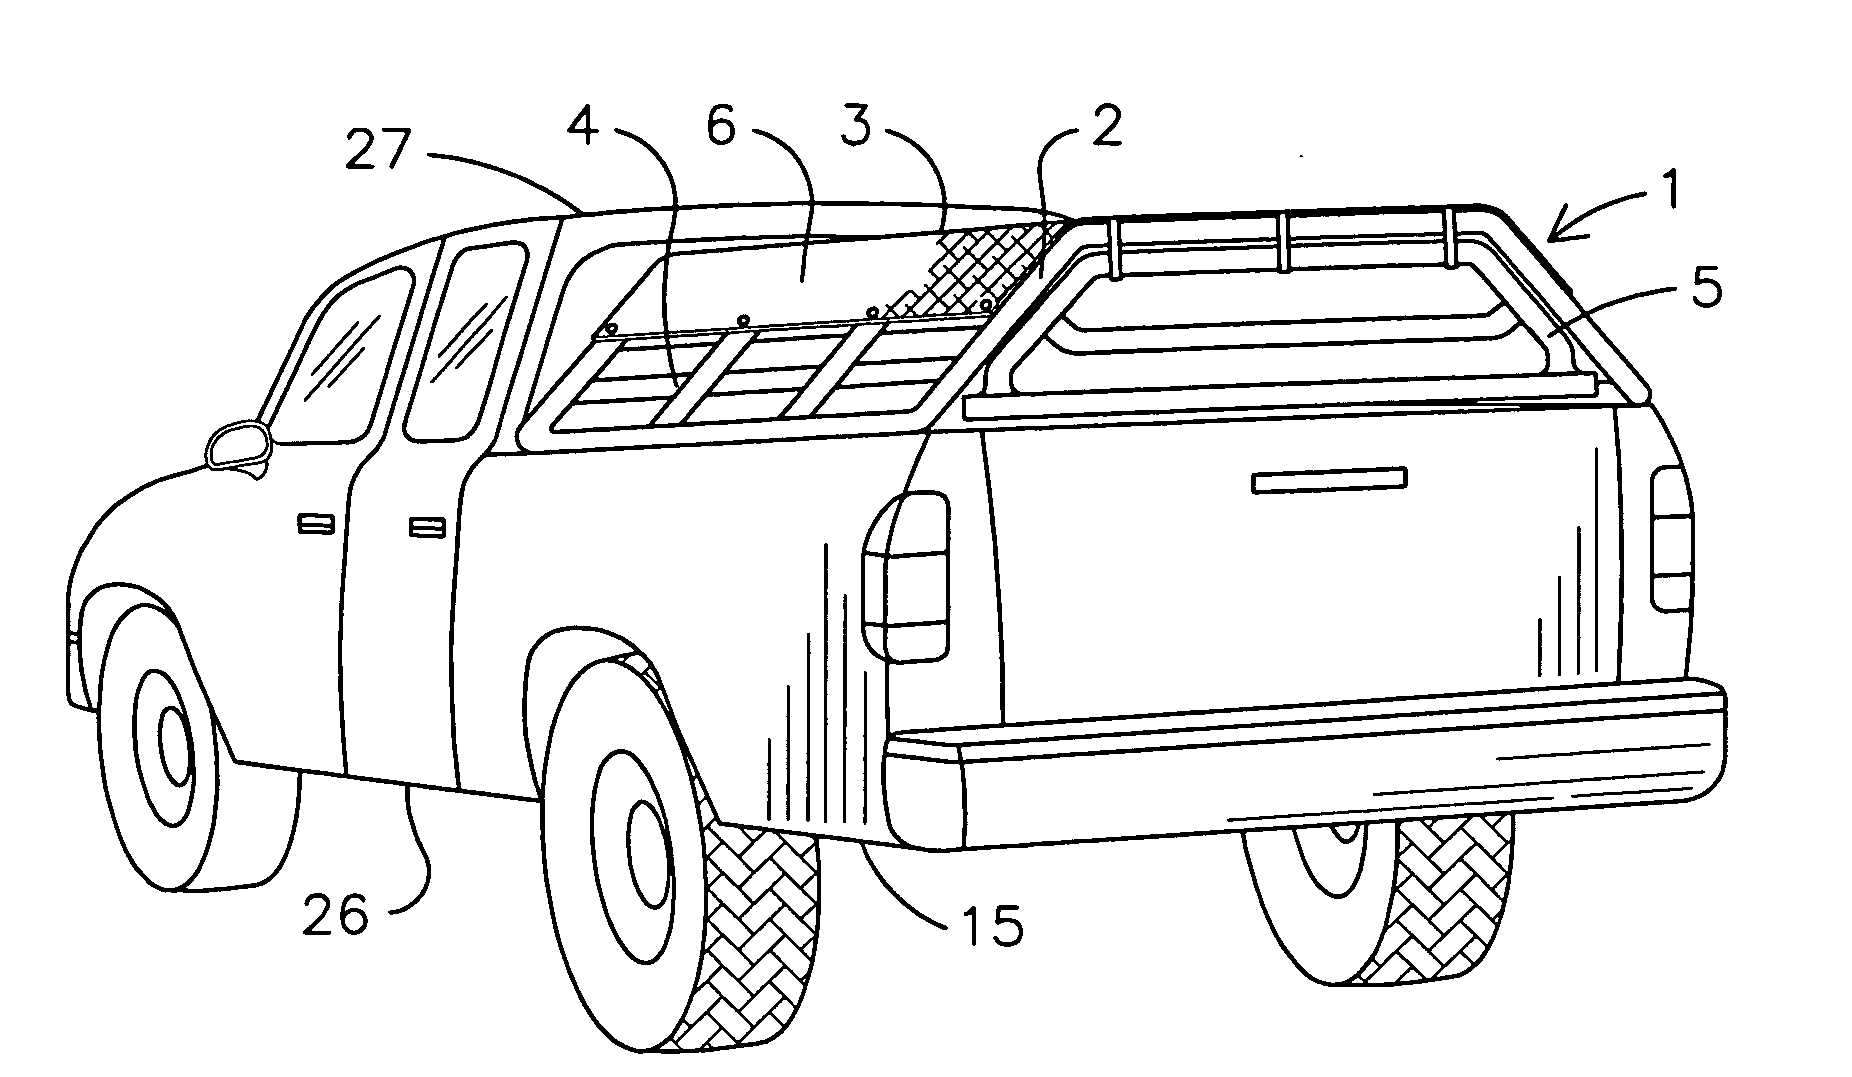 Truck bed animal enclosure device